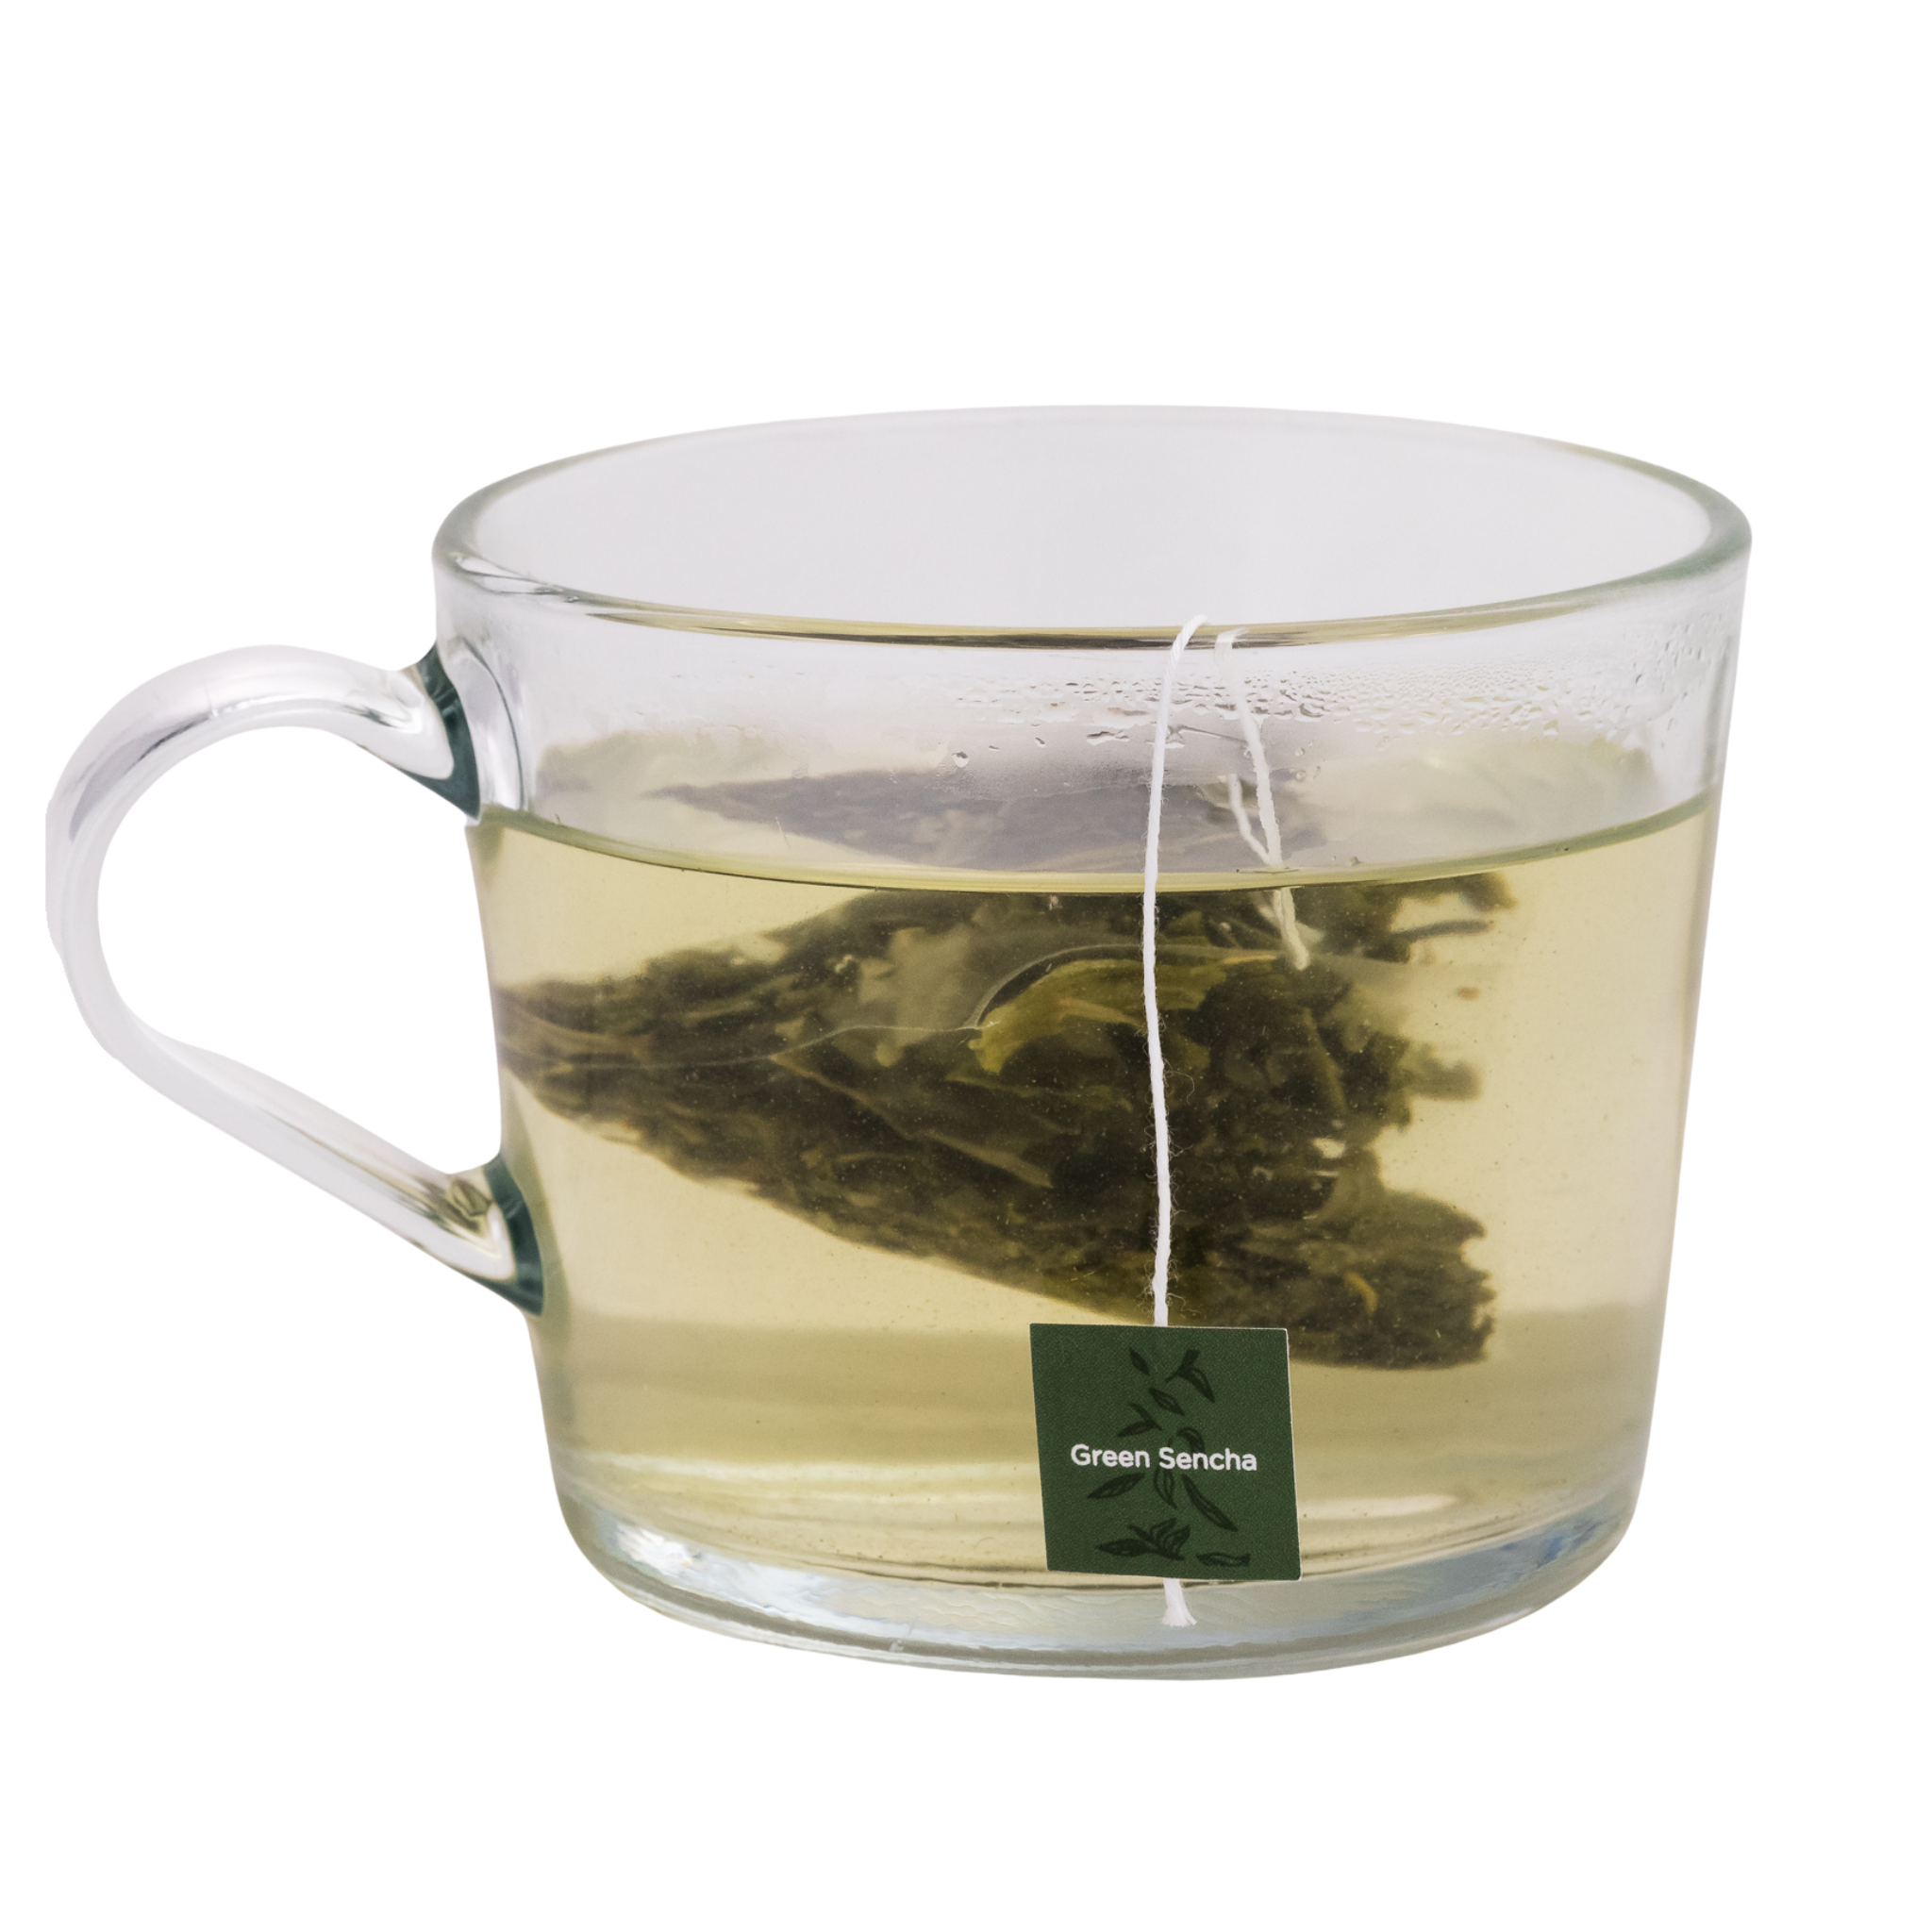 TEA MATE packaging  is either 100% recyclable, biodegradable or recycled. TEA MATE Green Sencha biodegradable tea bagger inside a clear glass tea cup